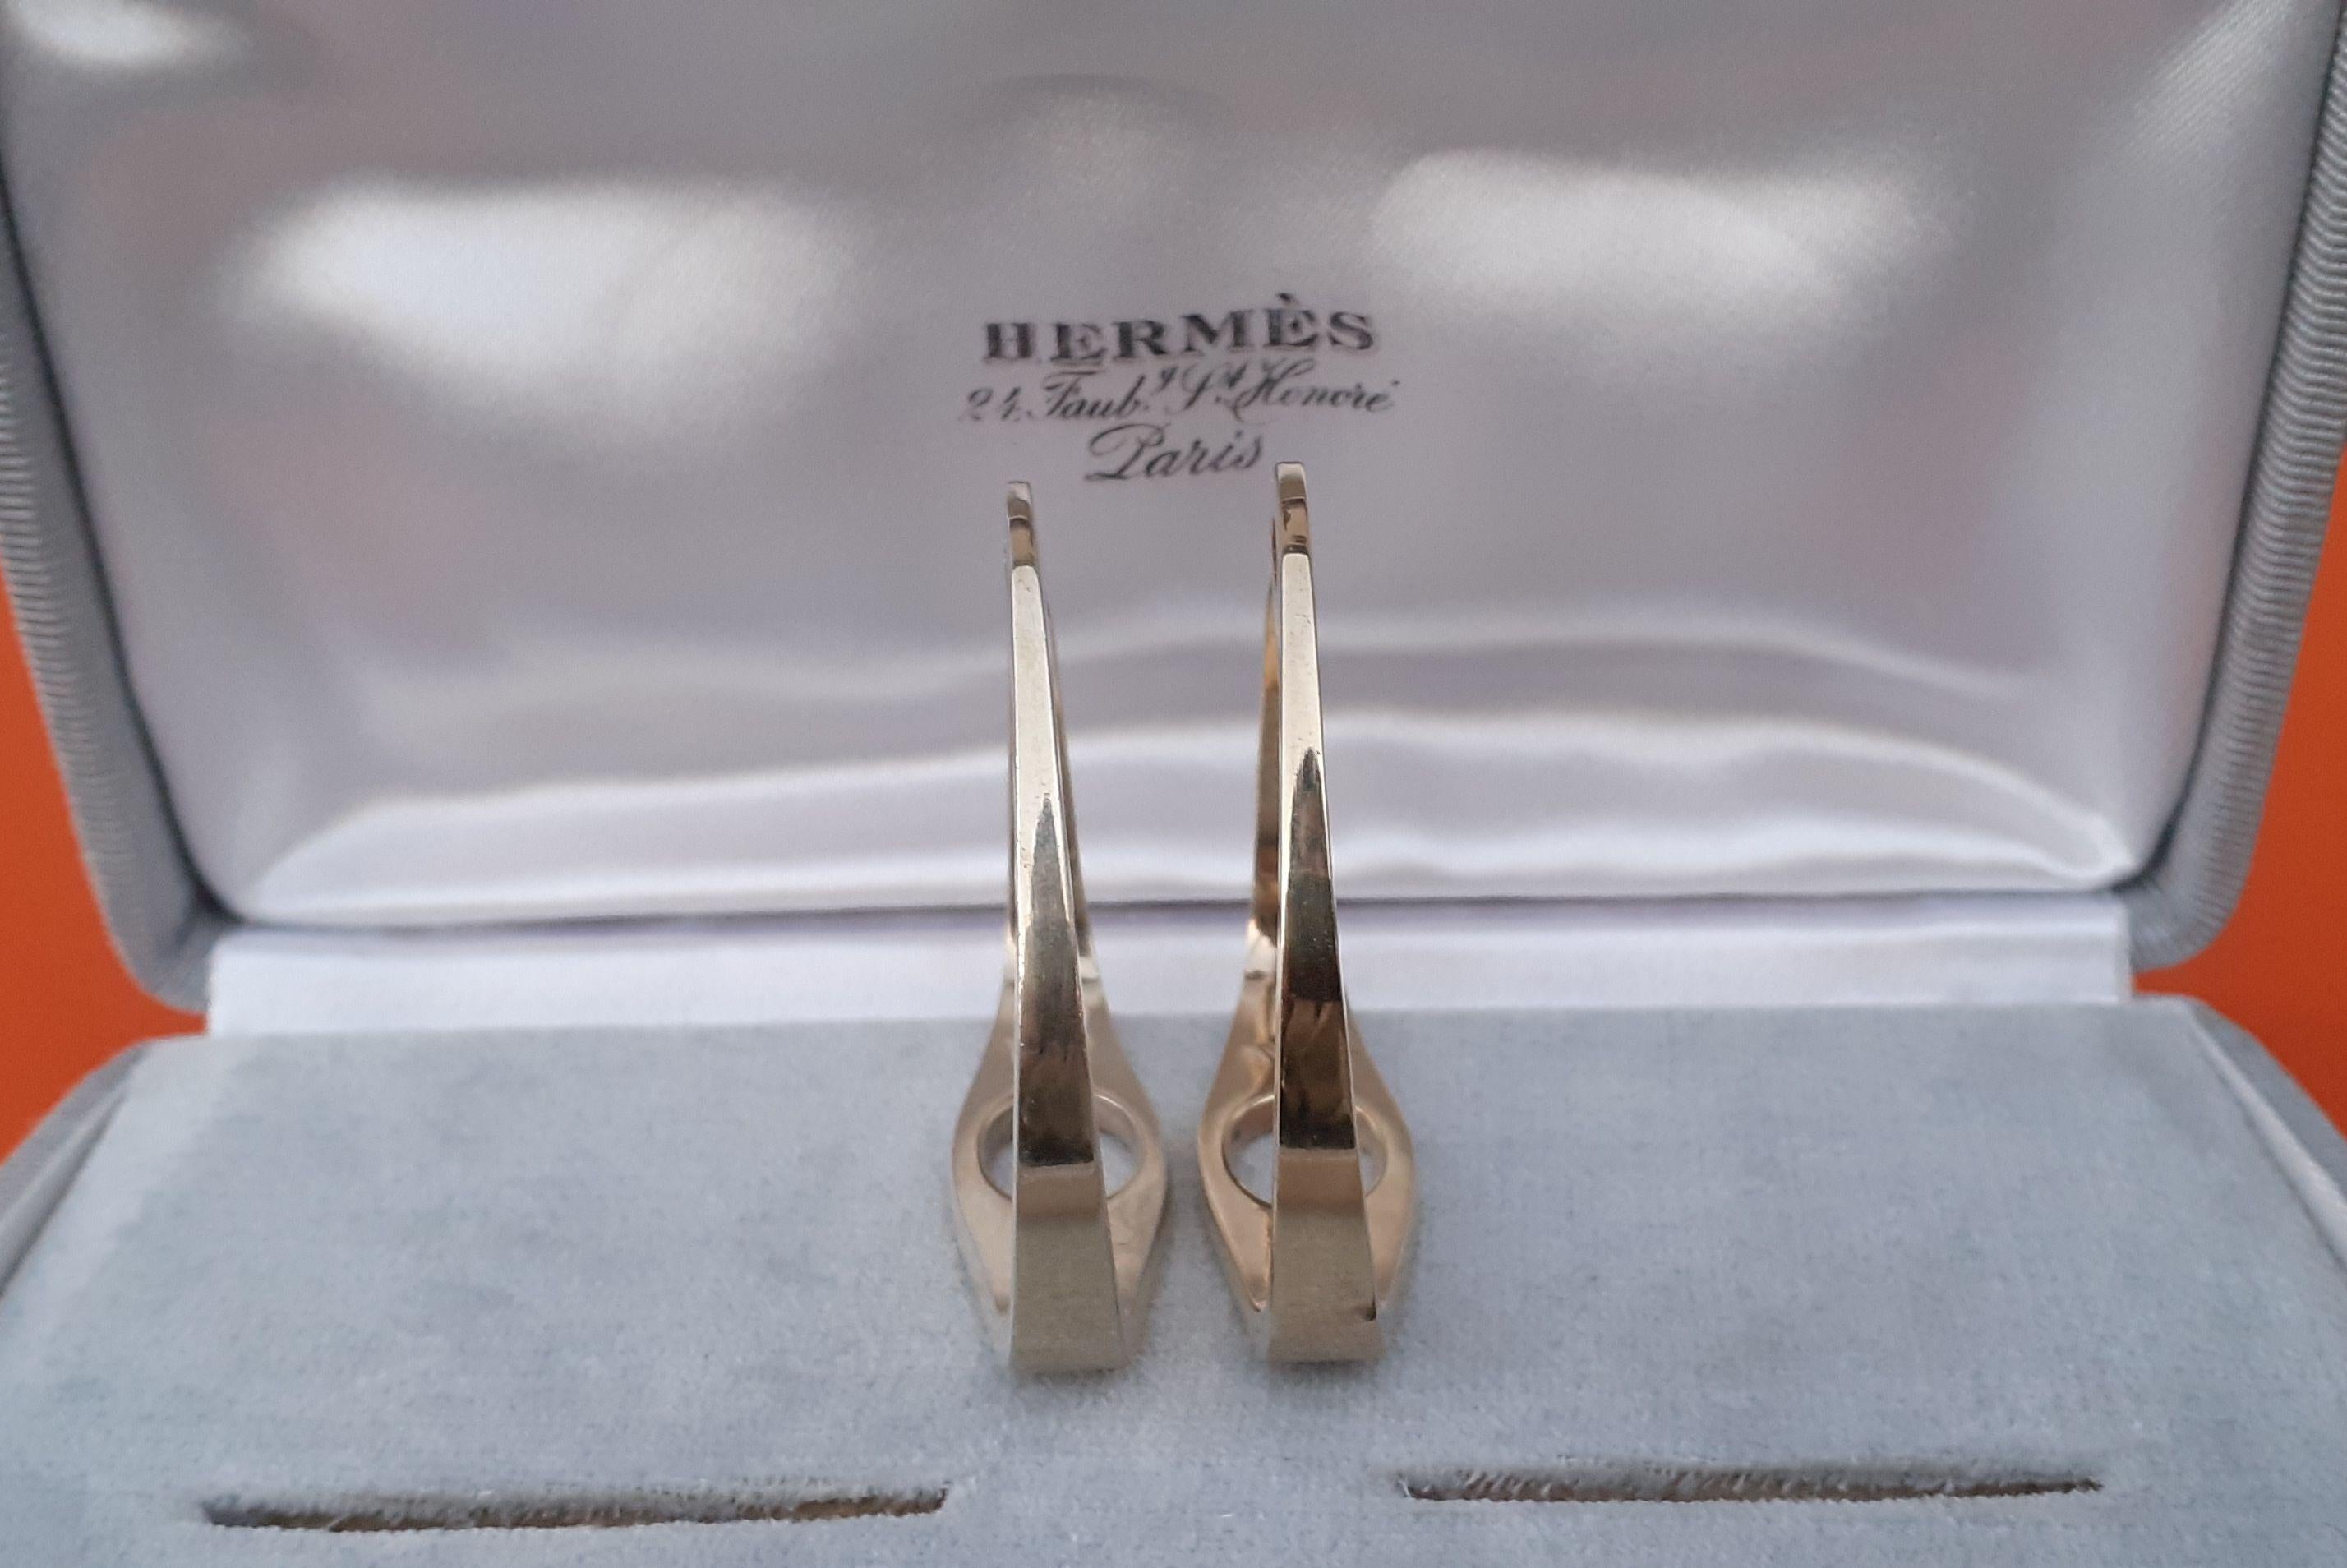 Exceptional Hermès Set of 2 Napkin Rings Stirrups Shaped in Silver-Gilt Texas For Sale 11